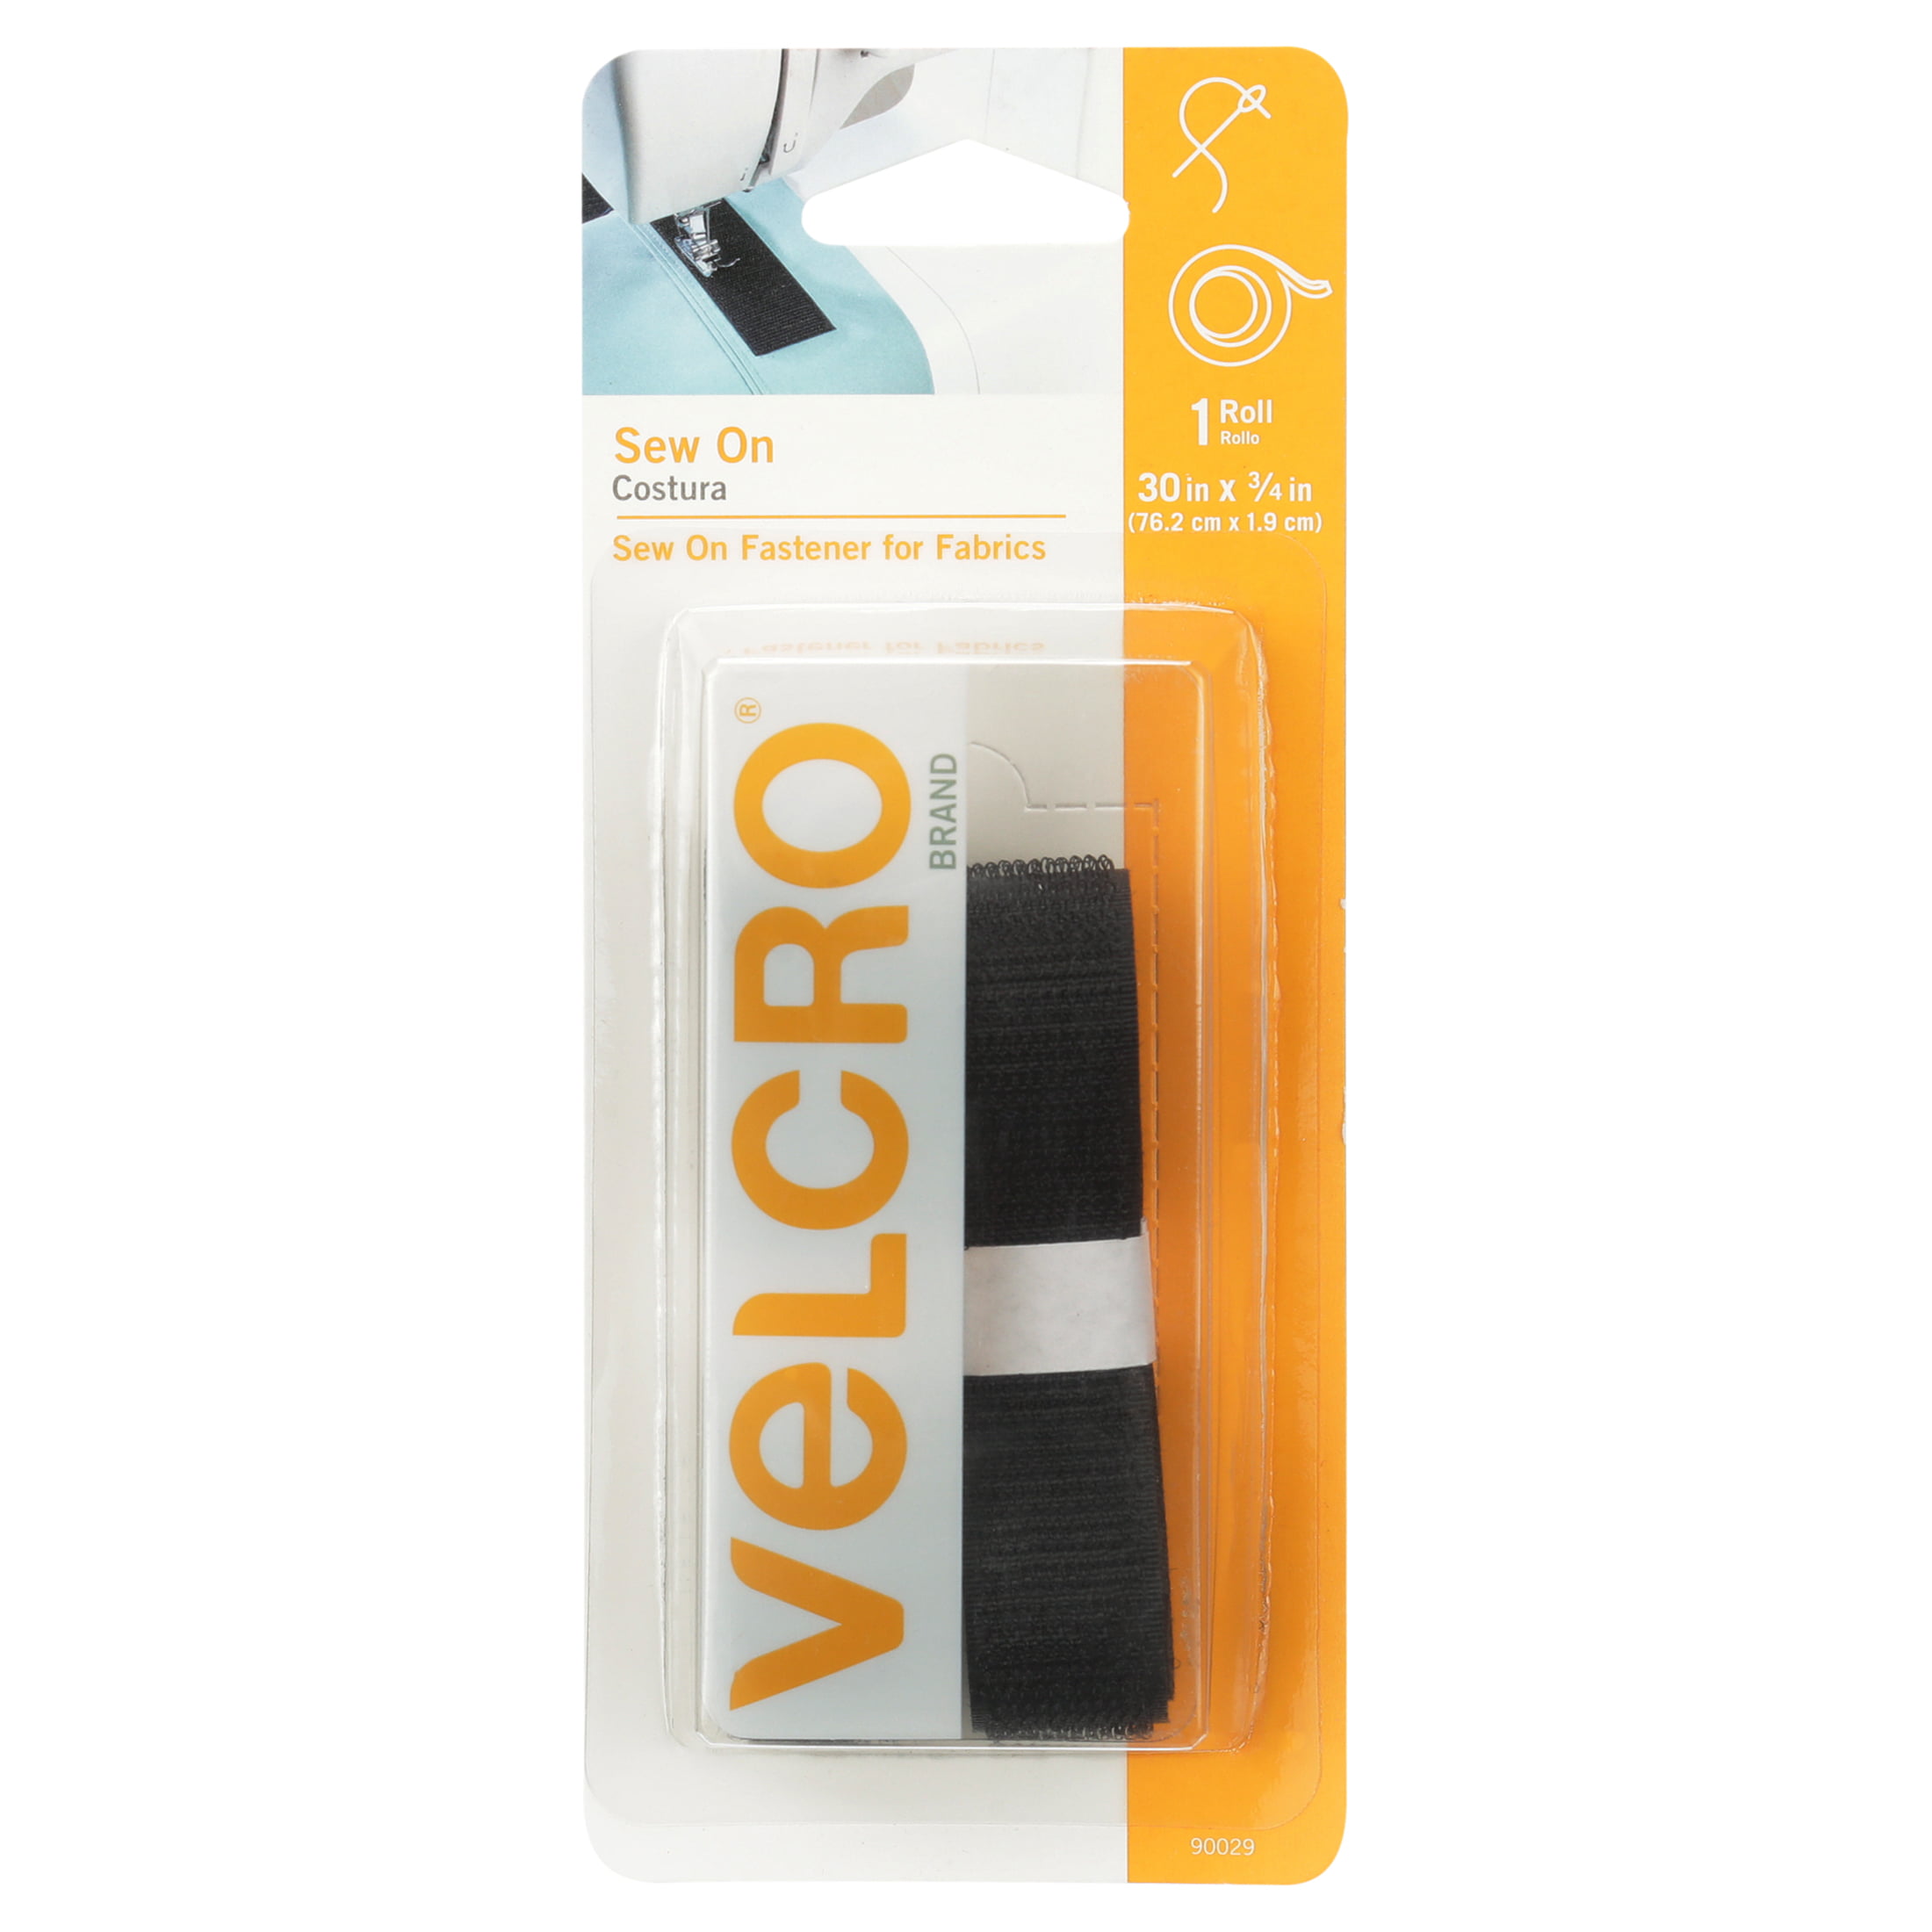 No Ironing or Gluing VELCRO Brand For Fabrics 30in x 3/4in White Tape Ideal Substitute for Snaps and Buttons Sew On Fabric Tape for Alterations and Hemming 